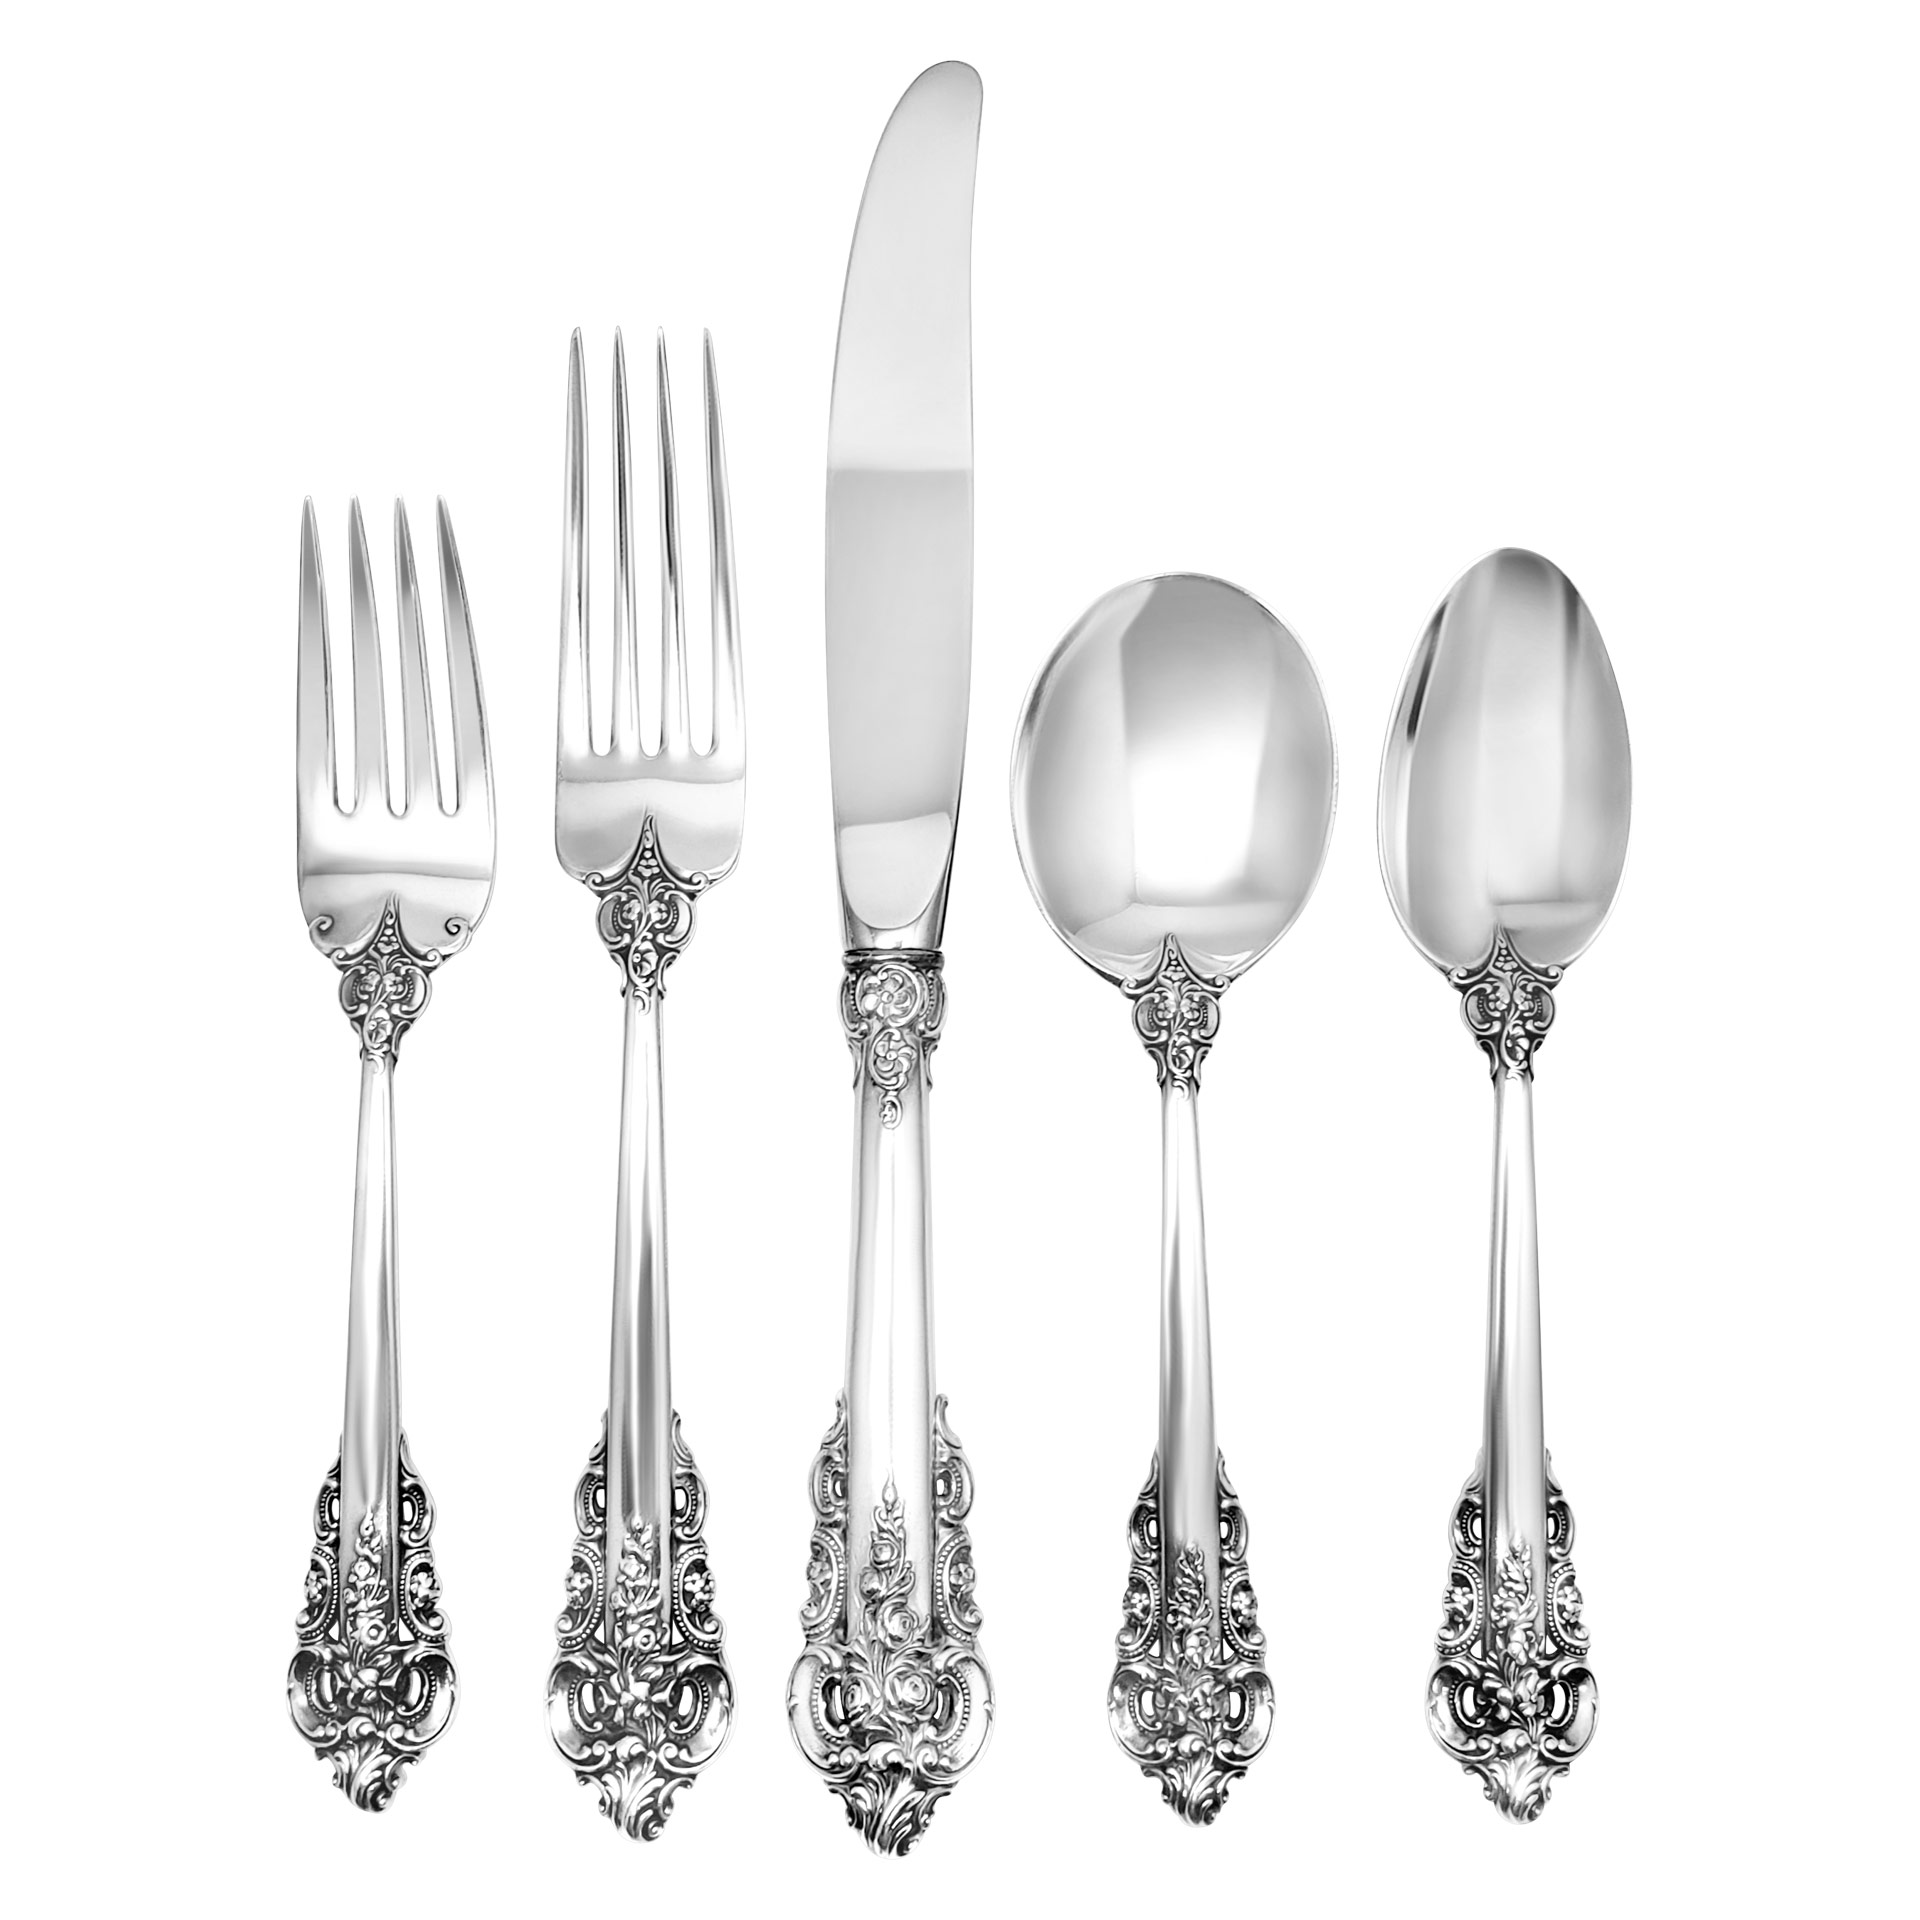 "GRANDE BAROQUE" sterling silver  flatware set patented in 1941 by Wallace. 5 place setting for 20- + 6 serving pieces. TOTAL: 115 pieces.